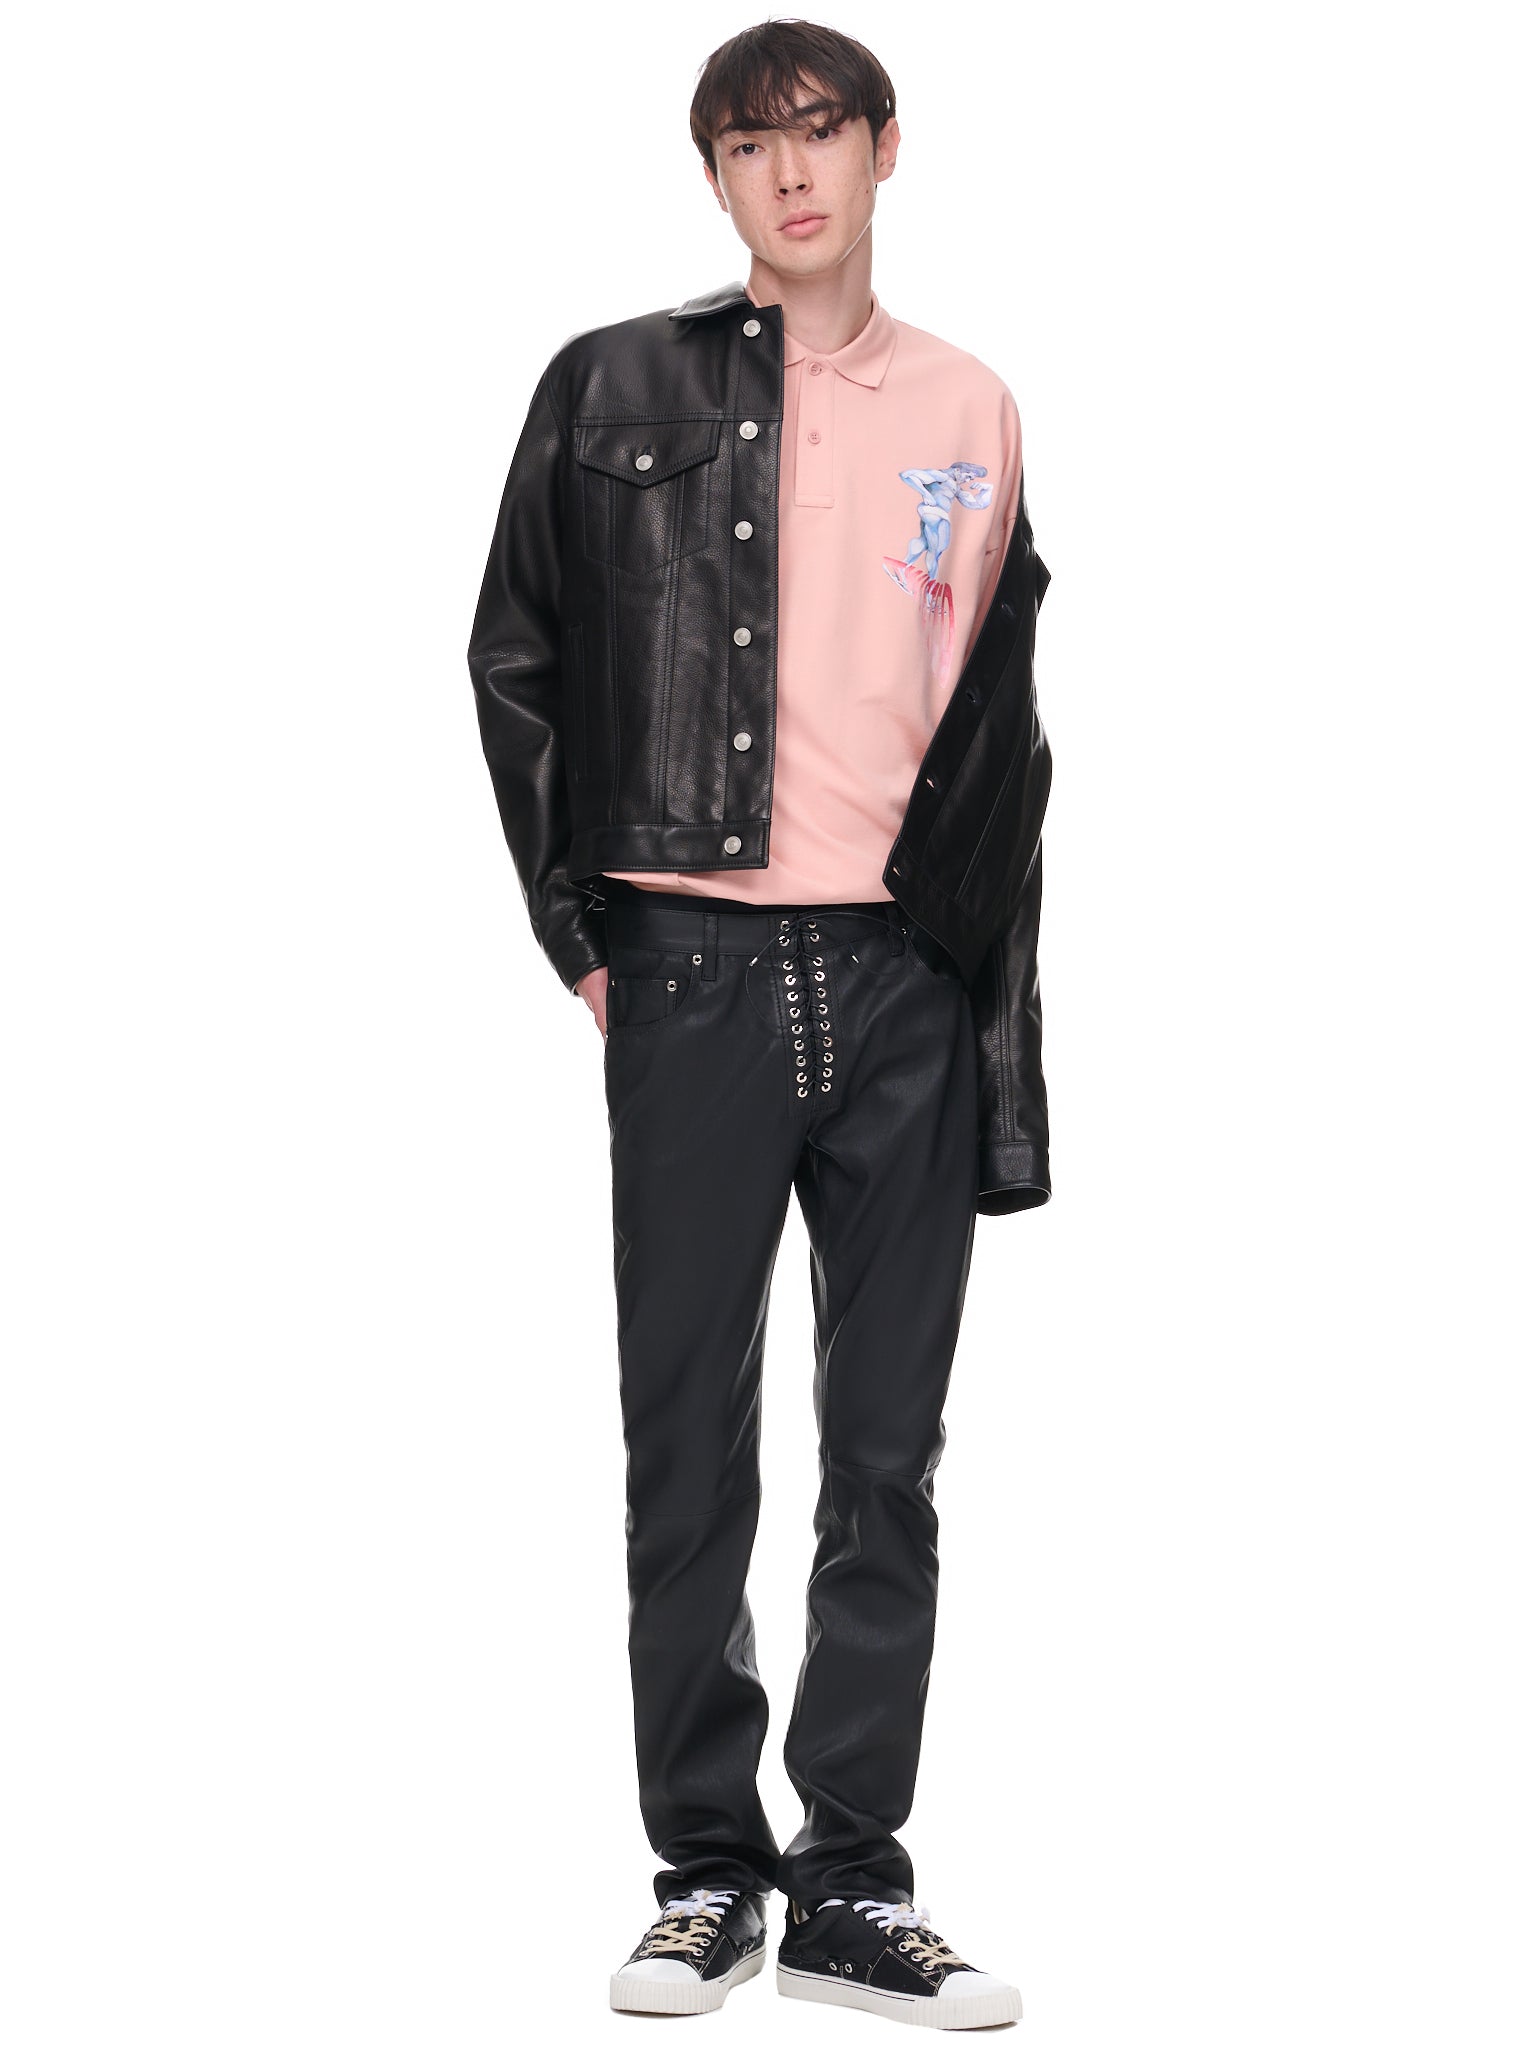 JW ANDERSON Tom of Finland Polo Shirt | H. Lorenzo - styled 